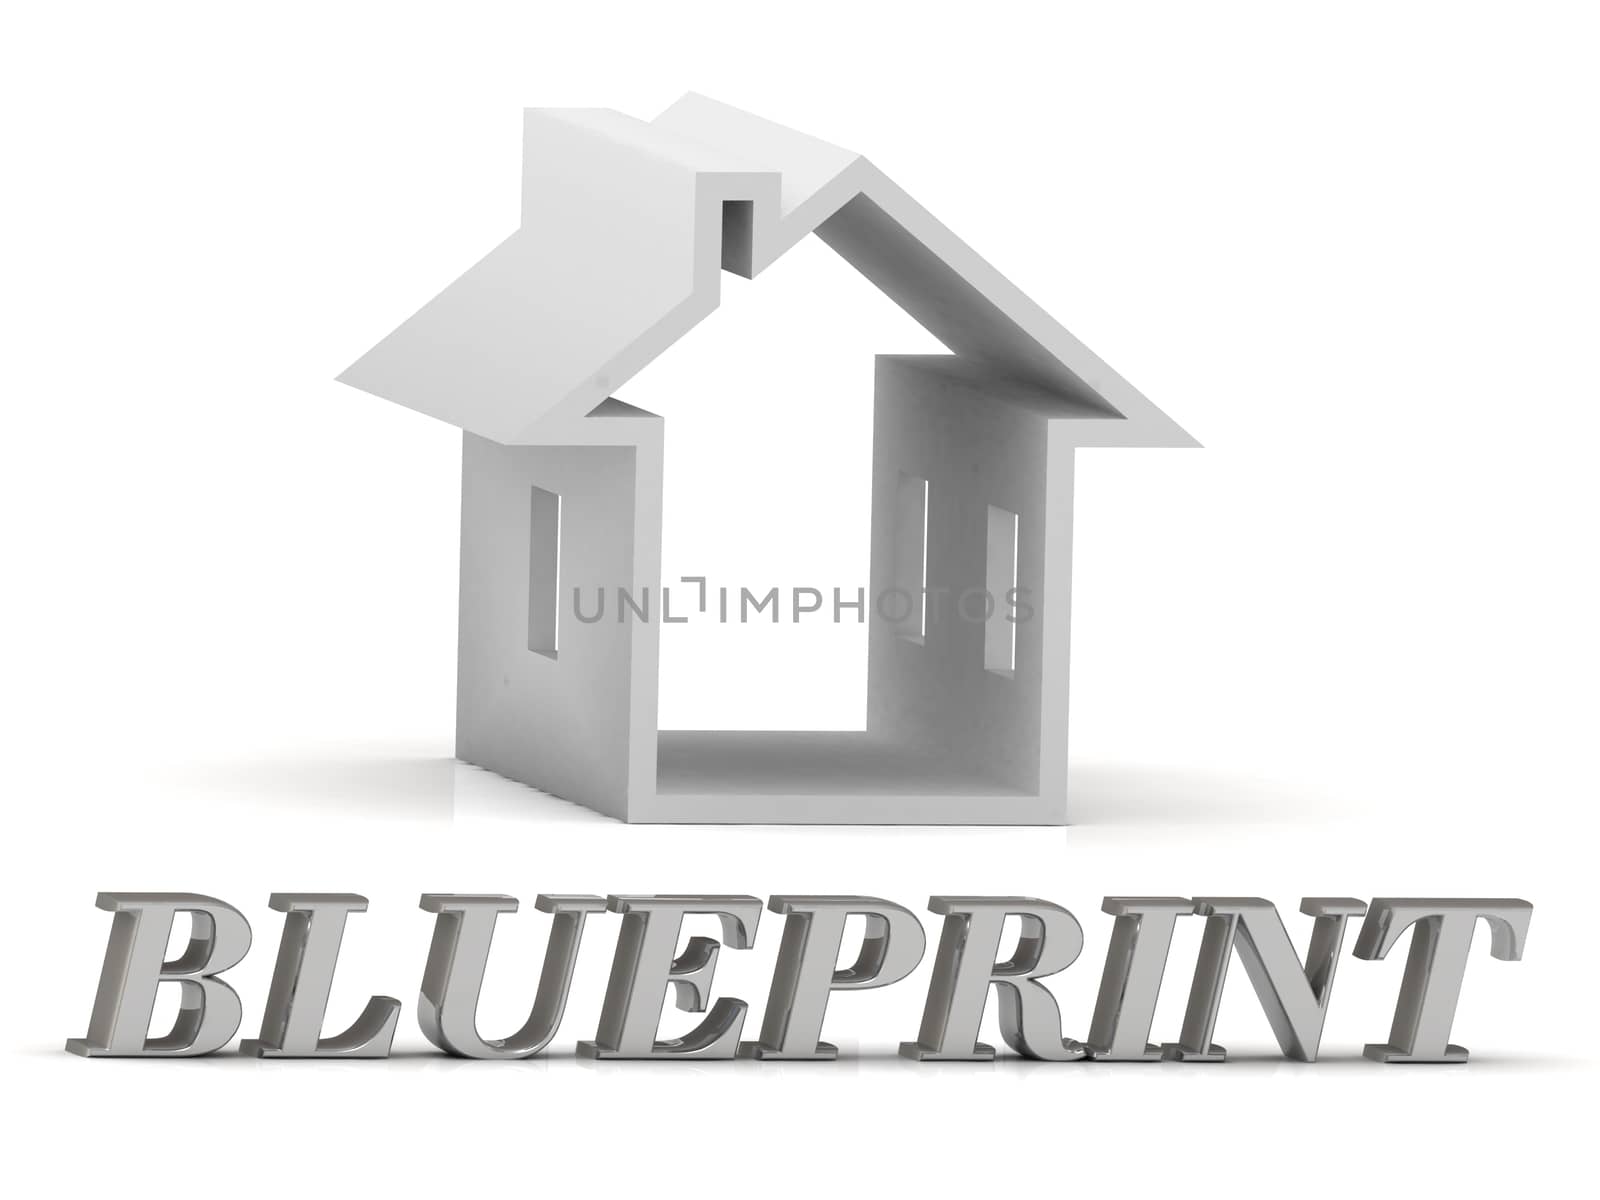 BLUEPRINT- inscription of silver letters and white house on white background